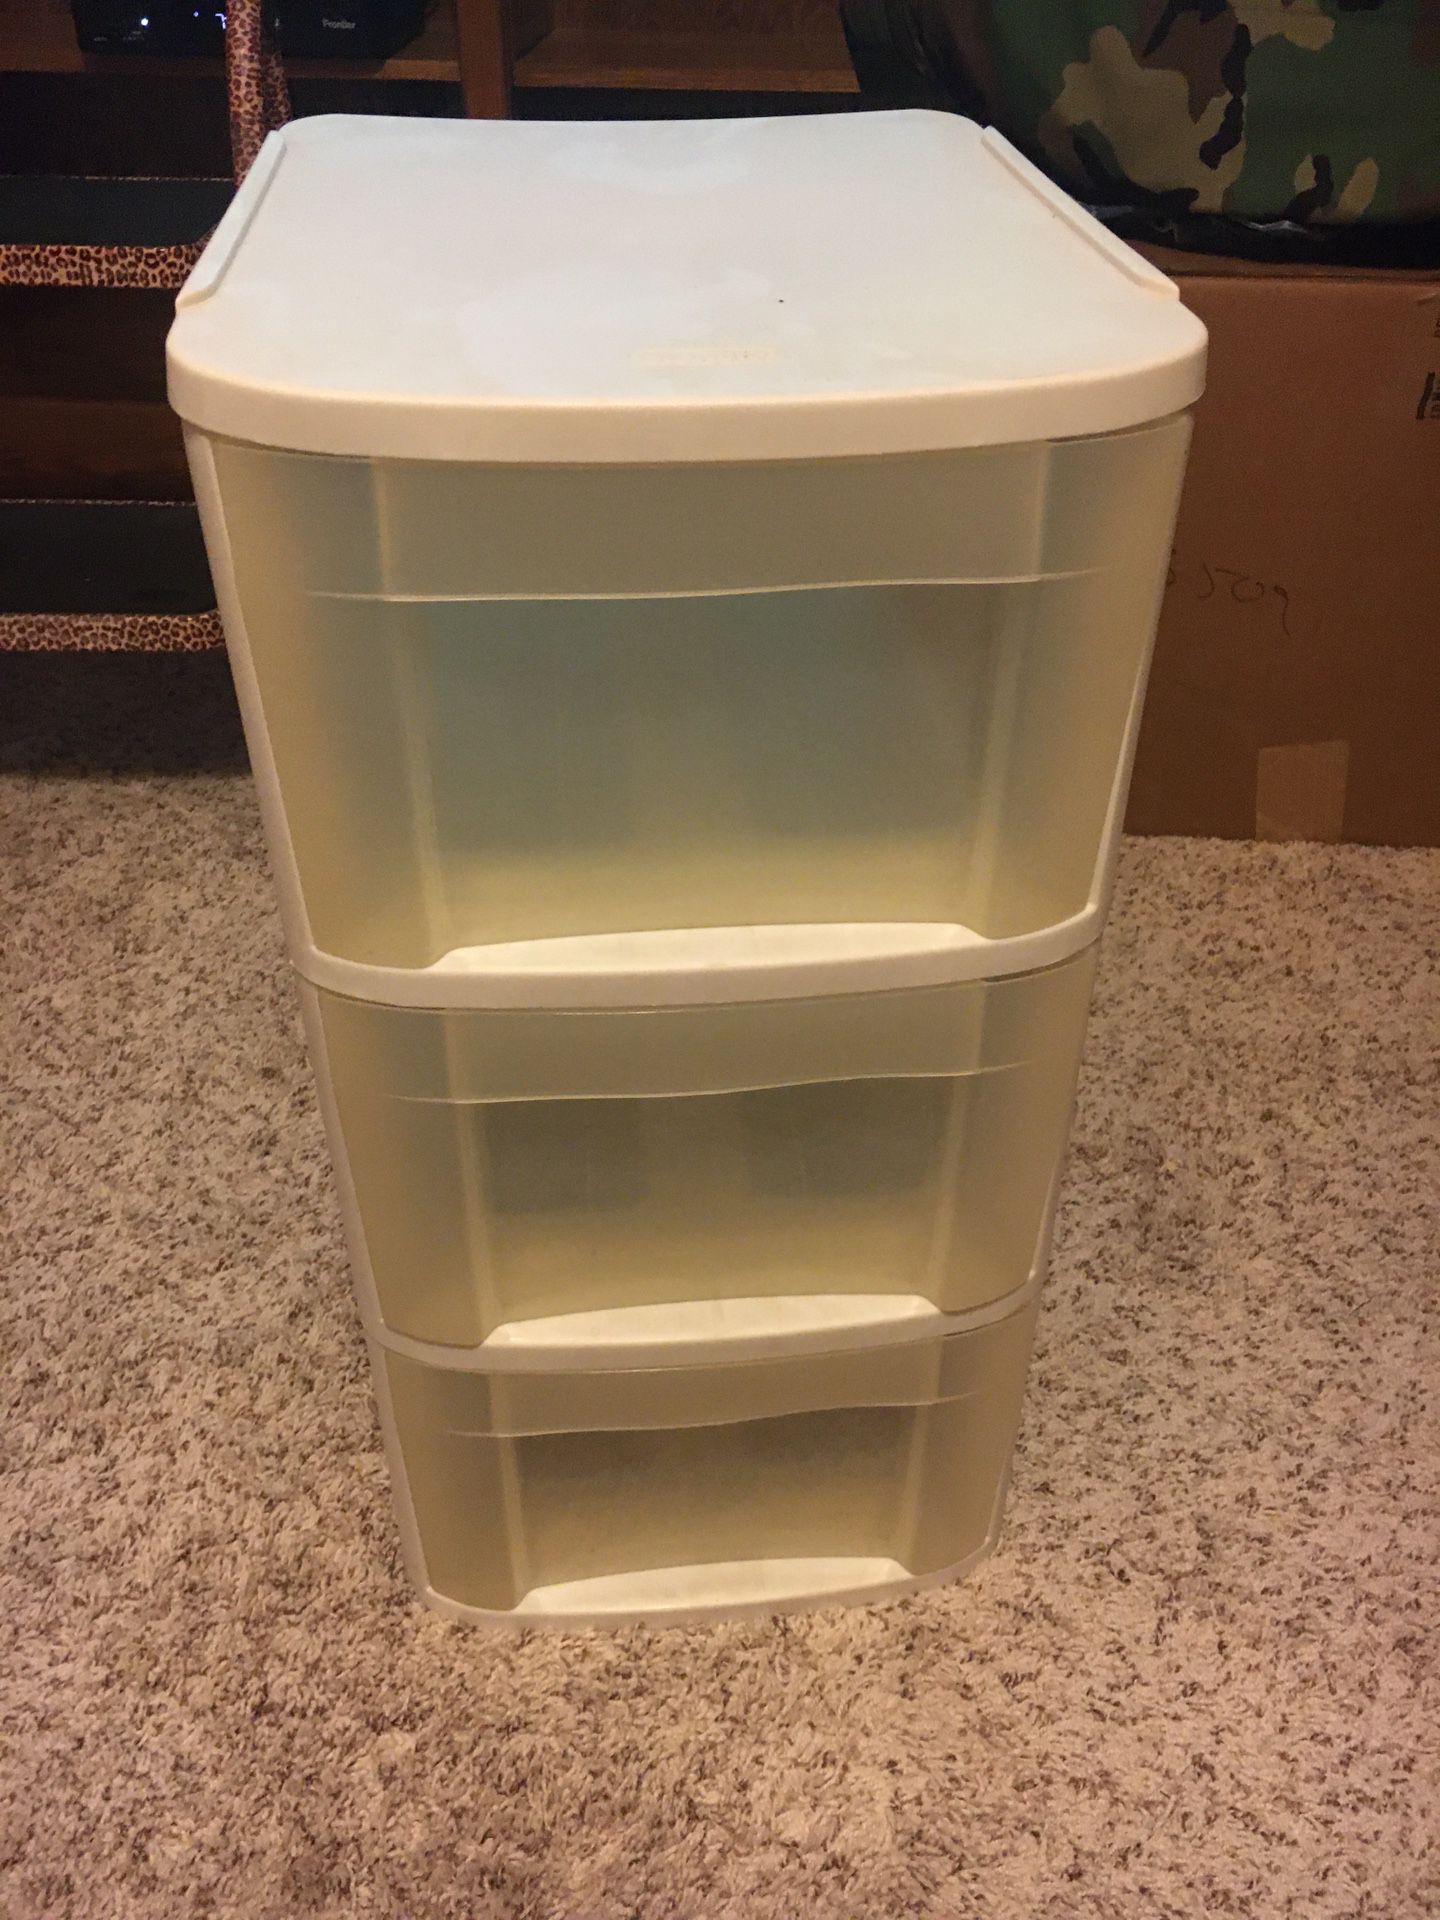 3 plastic storage drawers with rollers